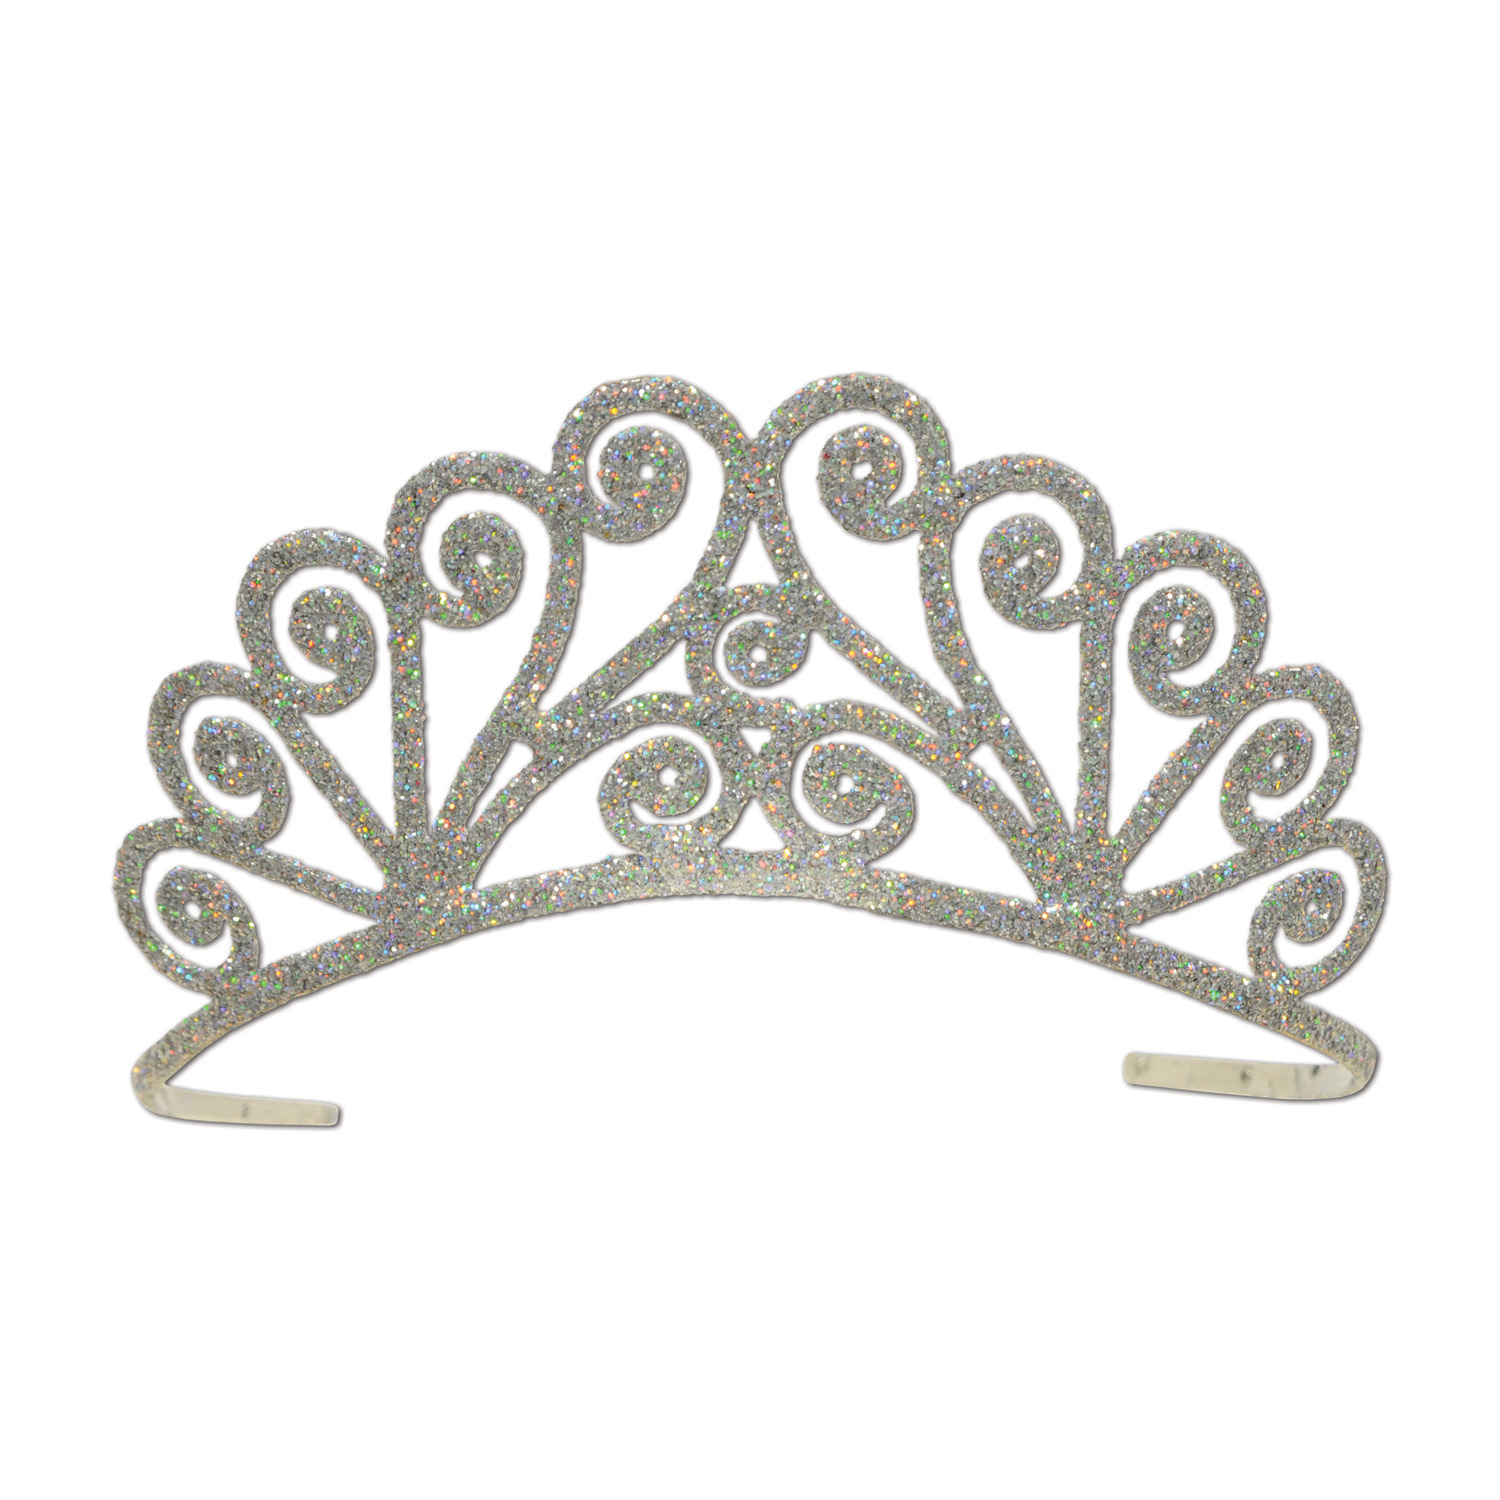 Silver plastic tiara covered with glitter and a swirly design.